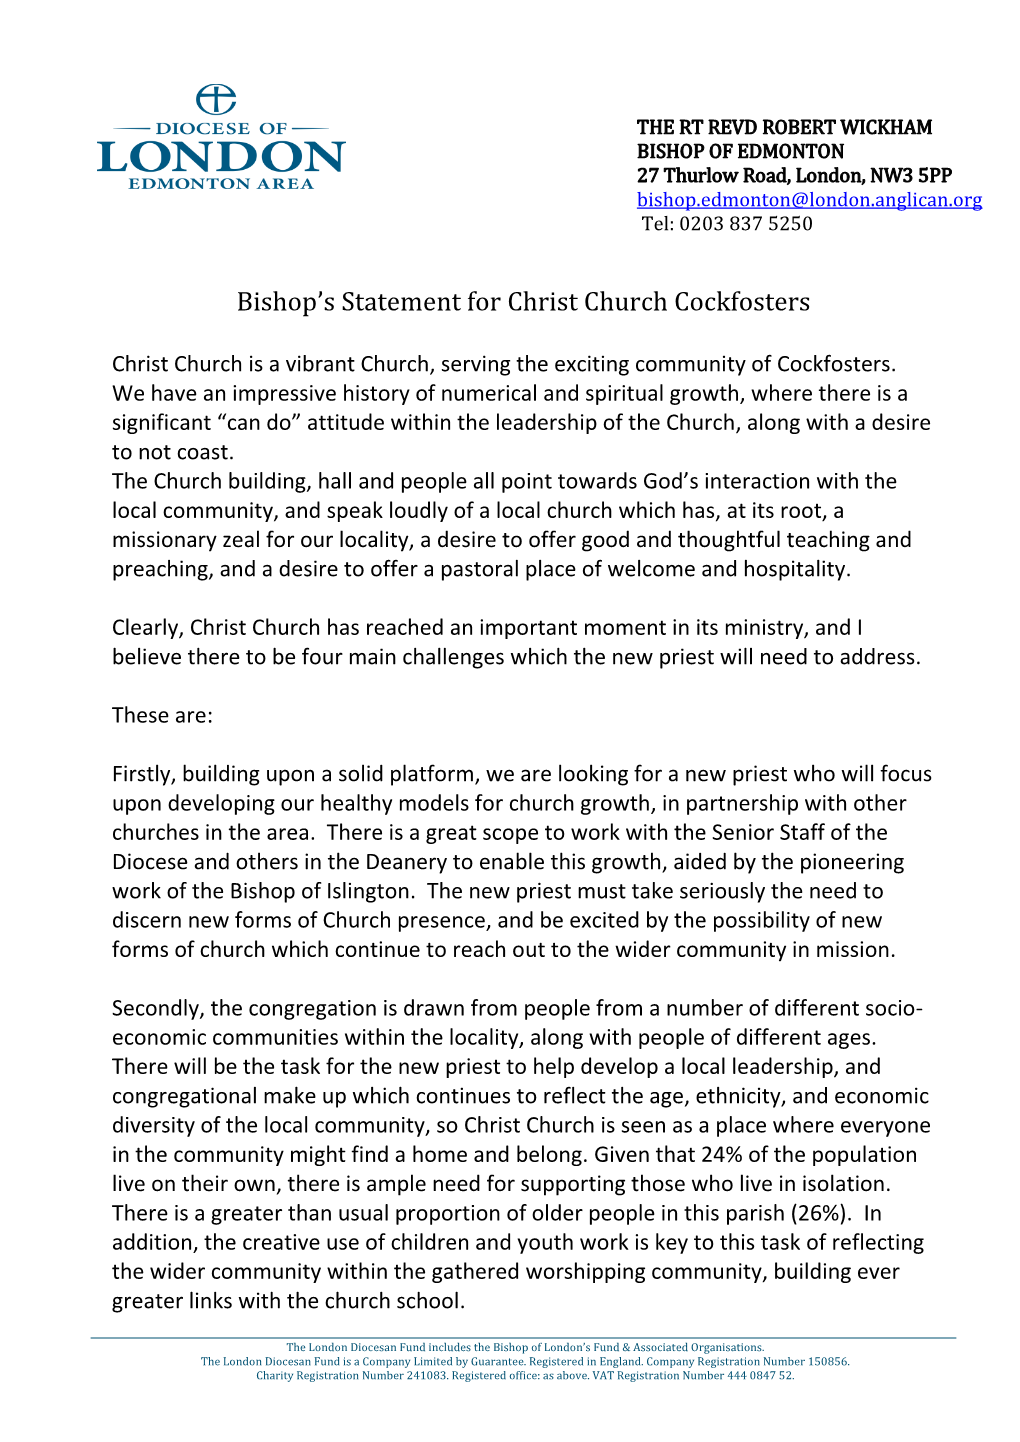 Bishop's Statement for Christ Church Cockfosters